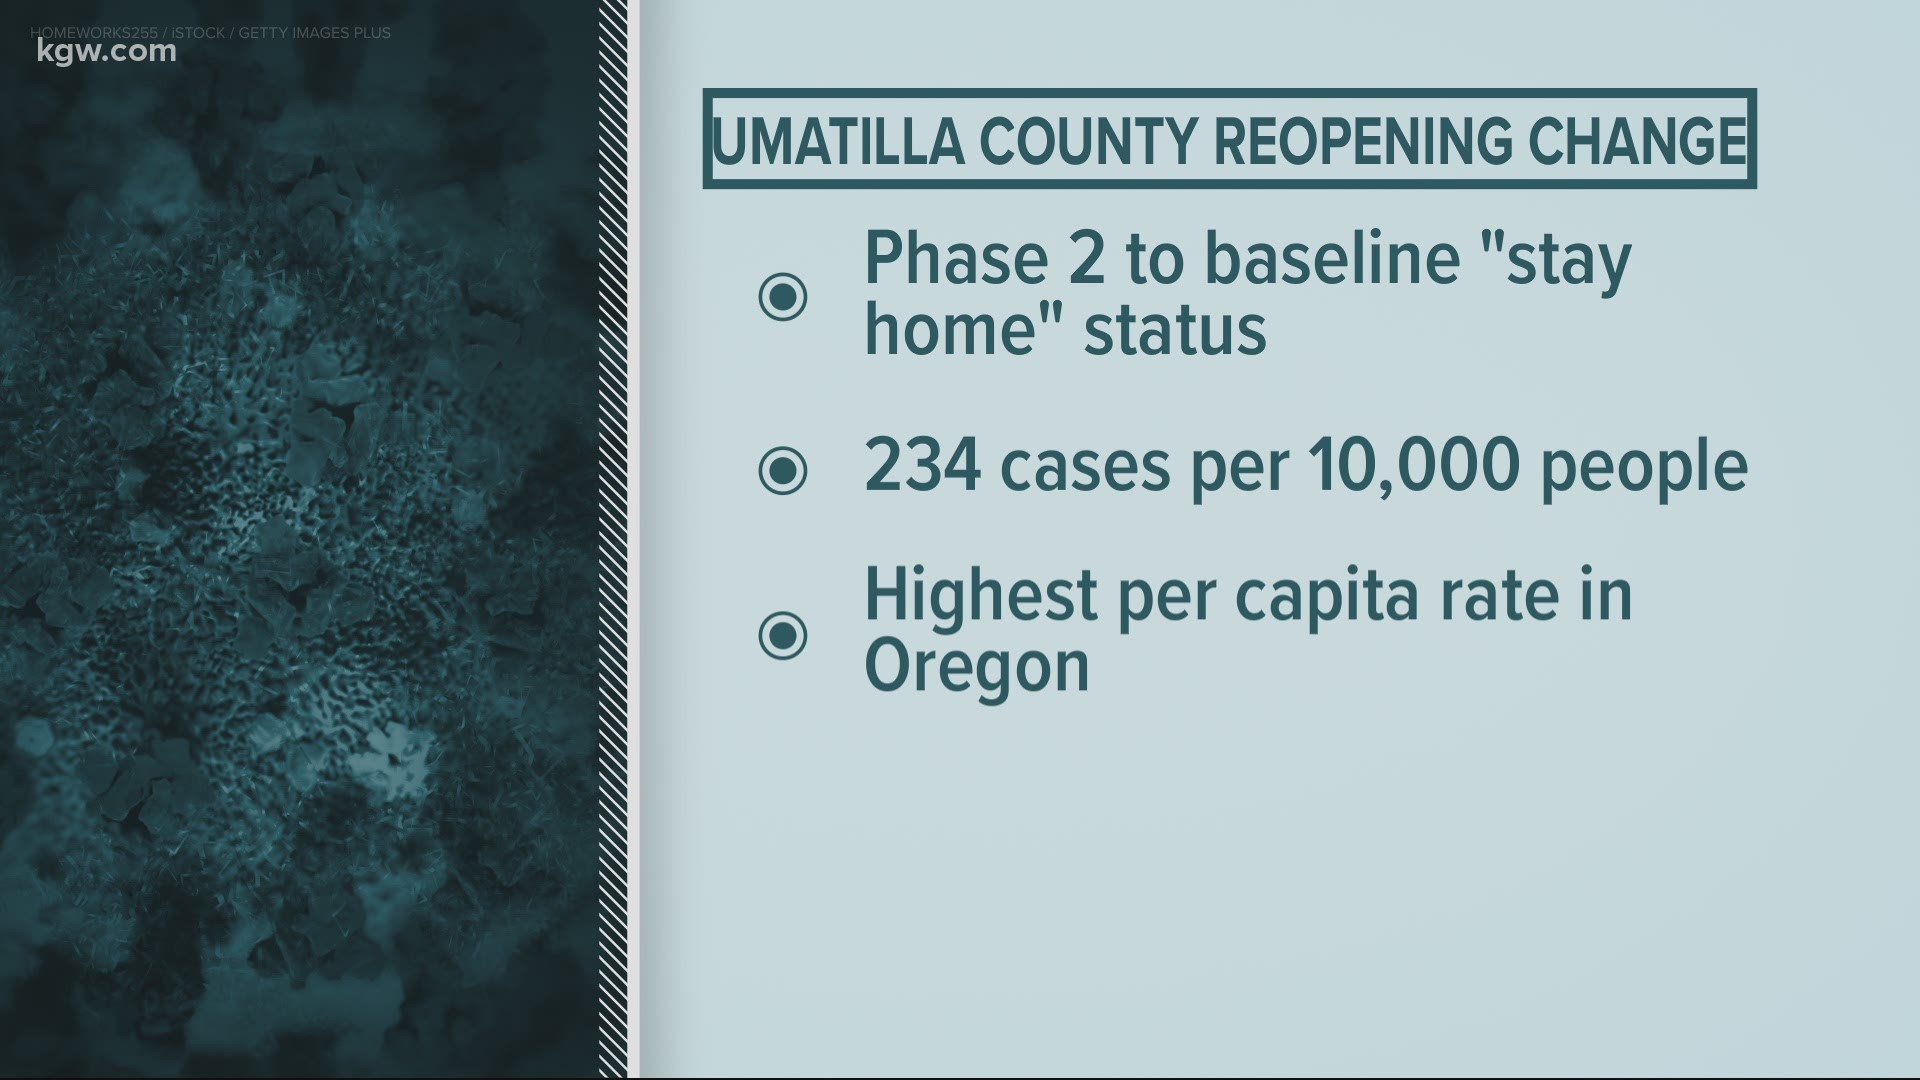 With a growing number of coronavirus infections, Governor Kate Brown is battening down the hatches in Umatilla County.